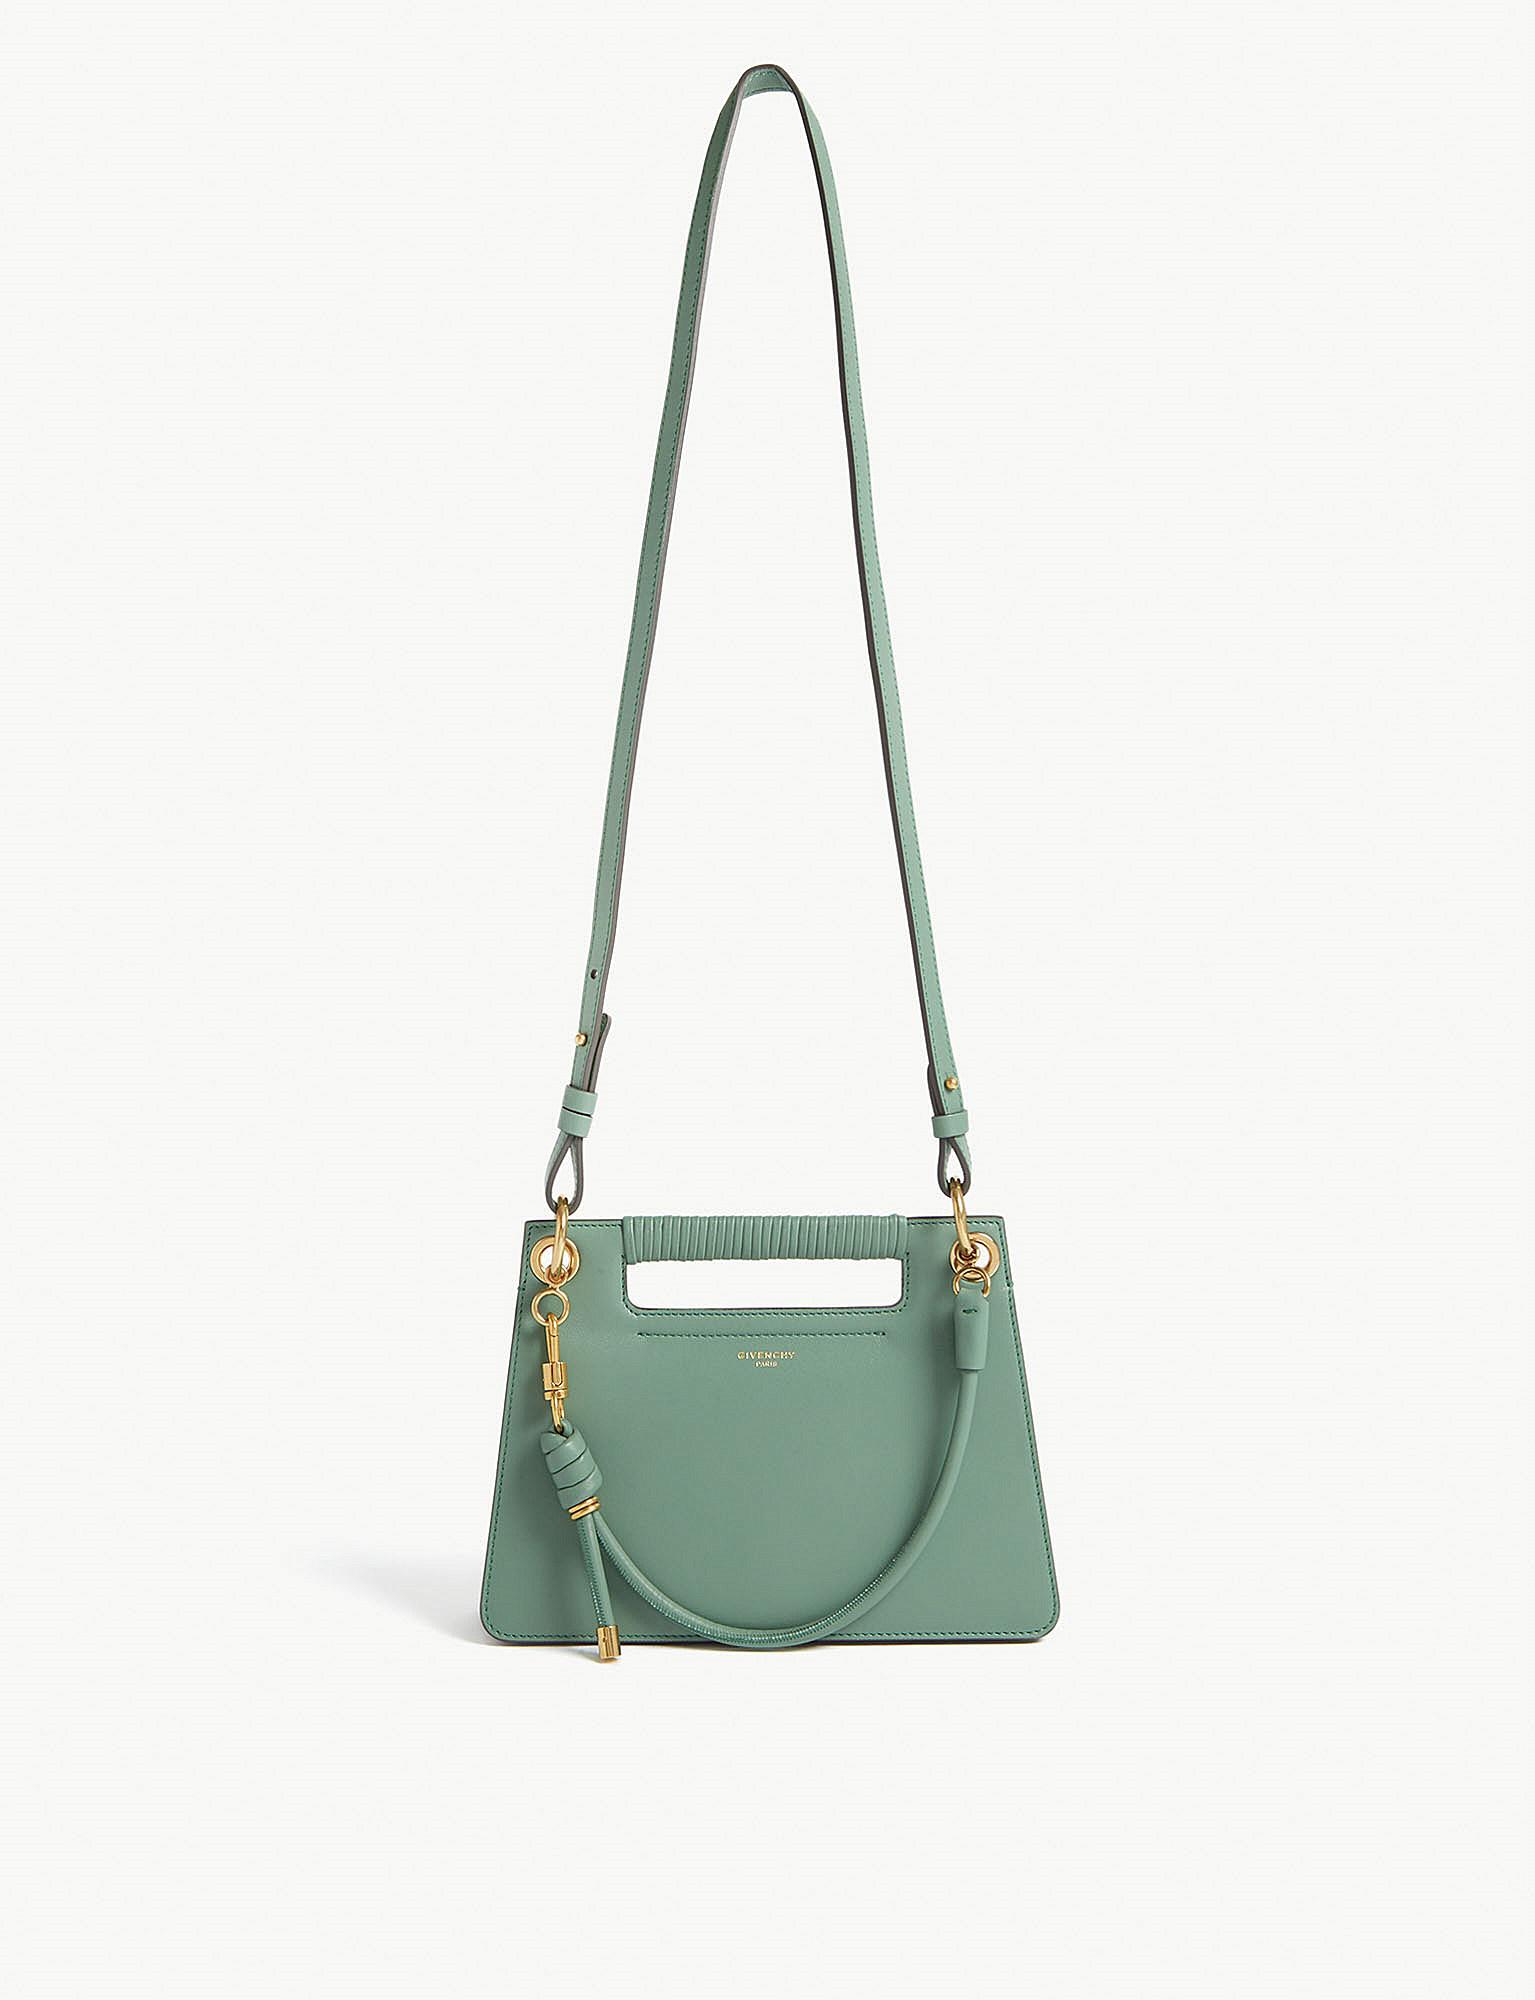 Lyst - Givenchy Whip Small Leather Cross-body Bag in Green